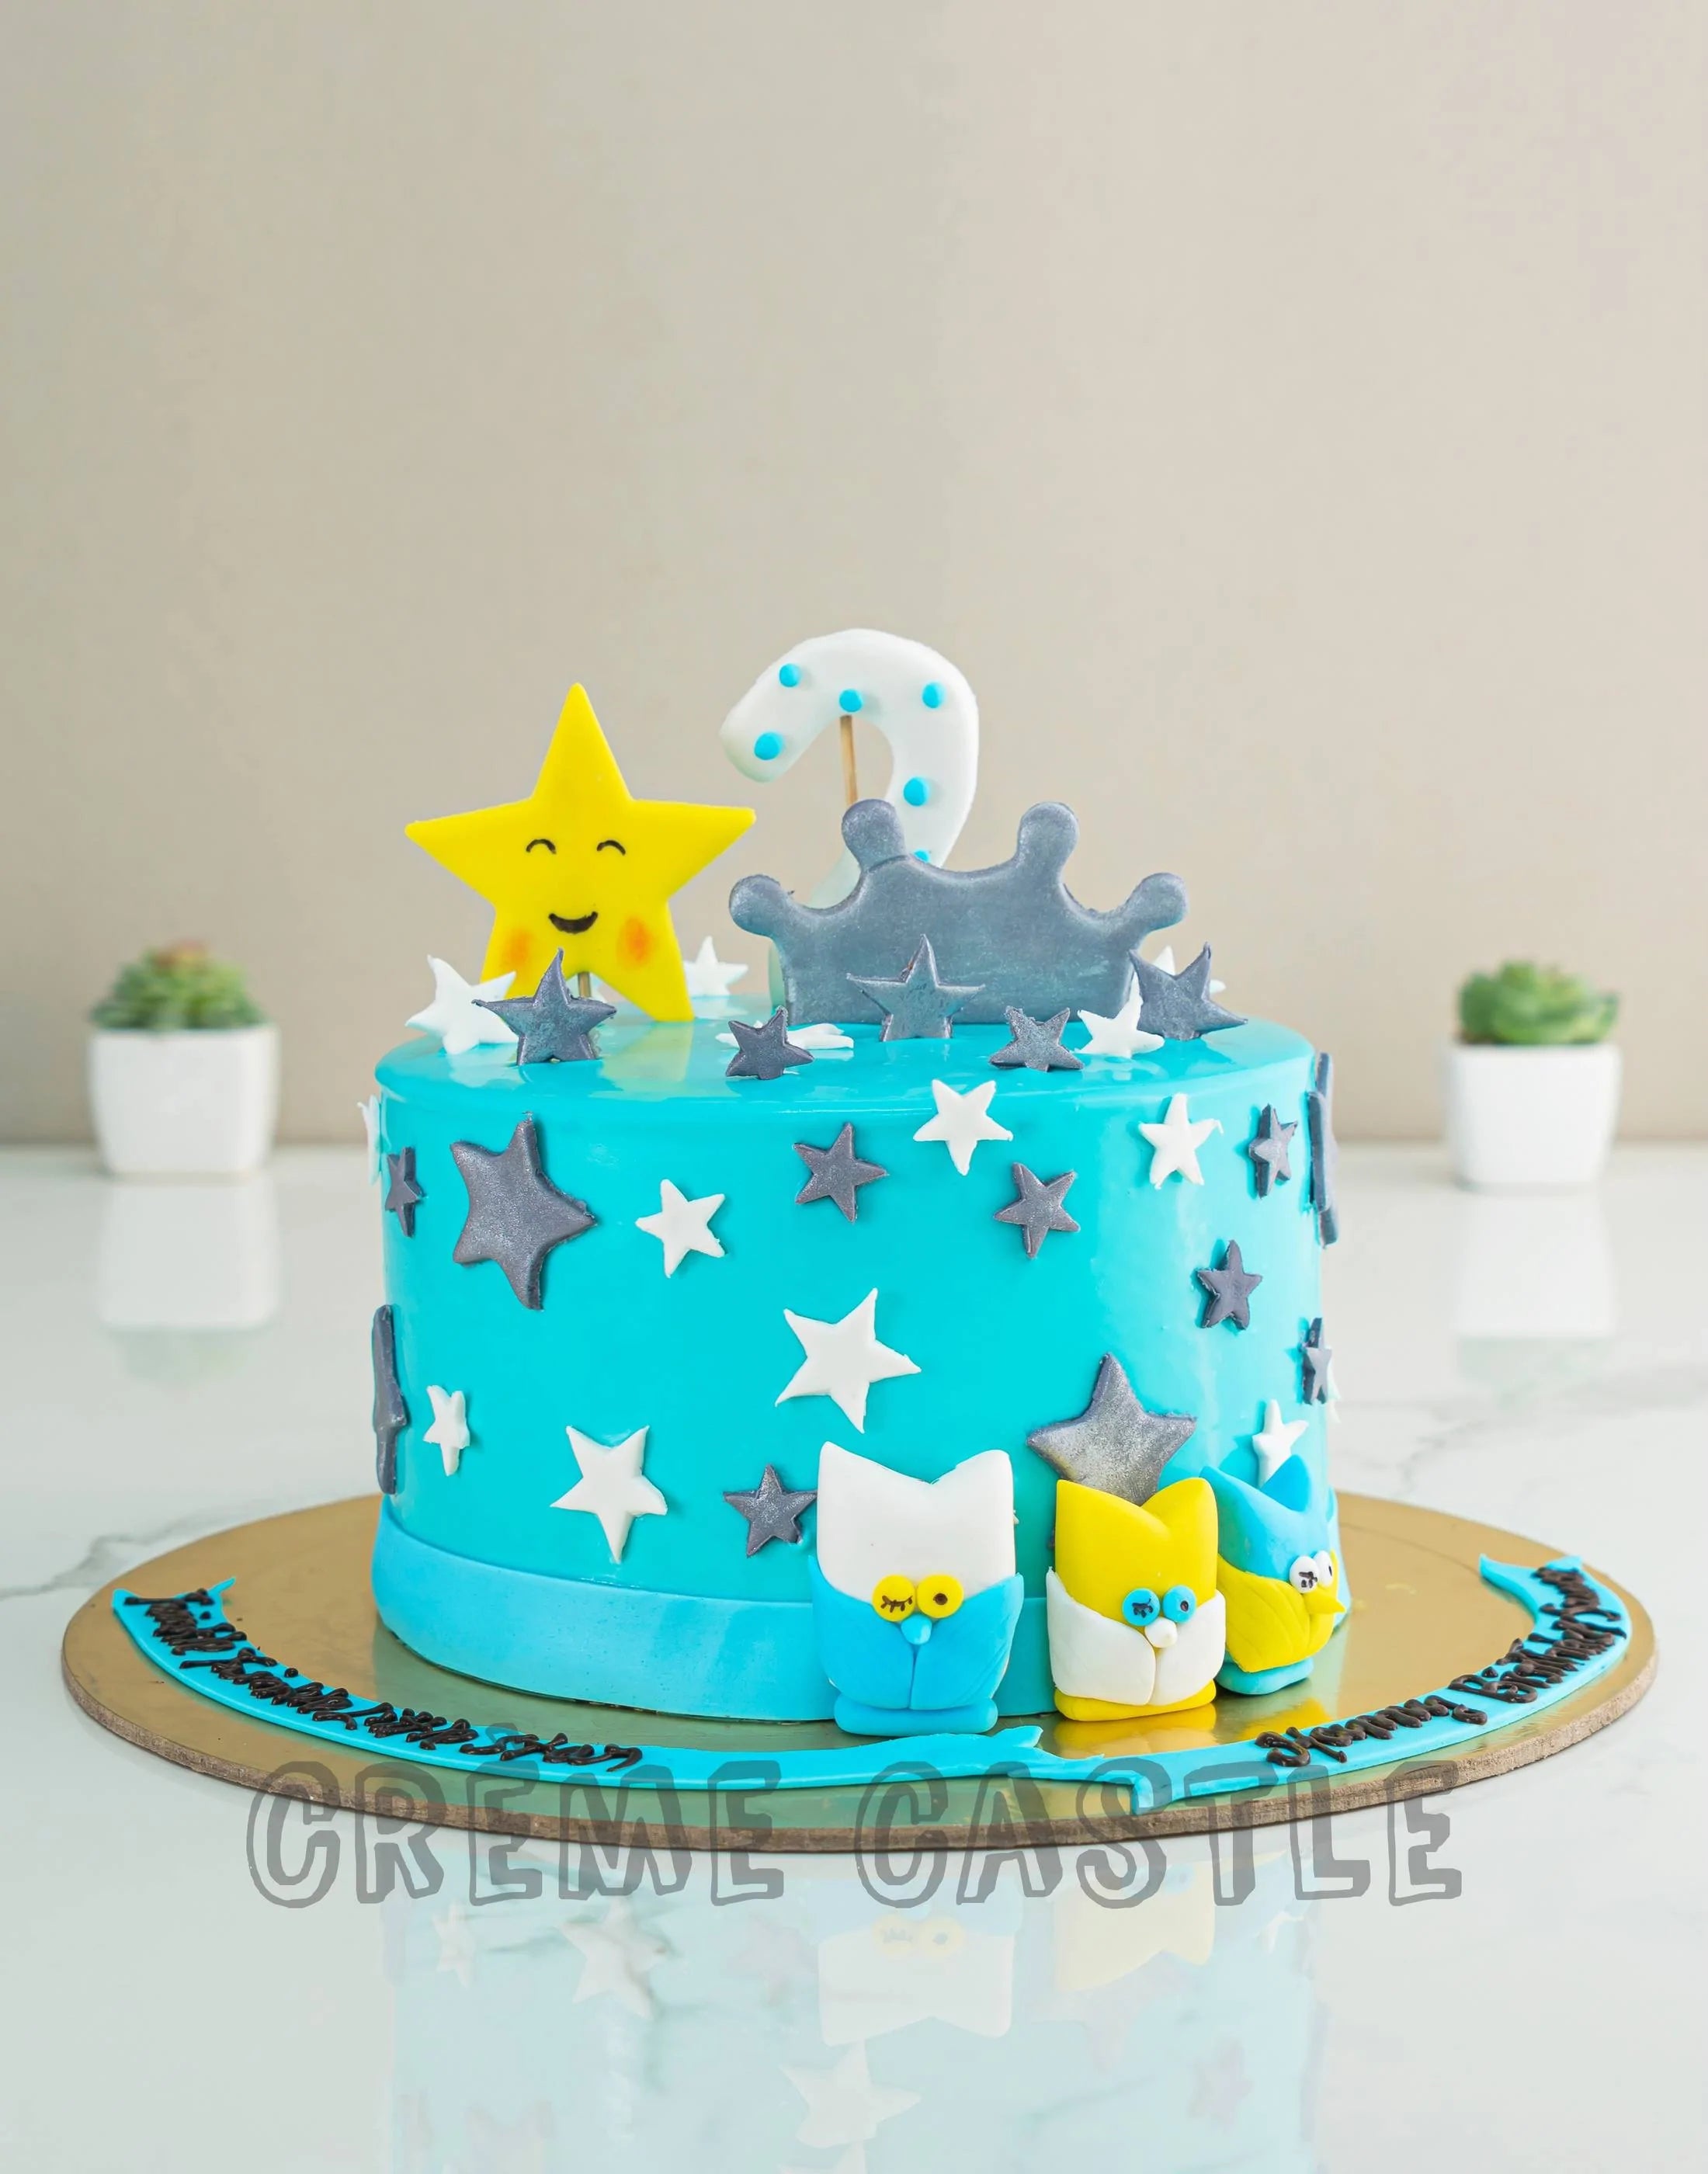 Pin on Frolic Cakes - My Daughter's Cakeshop